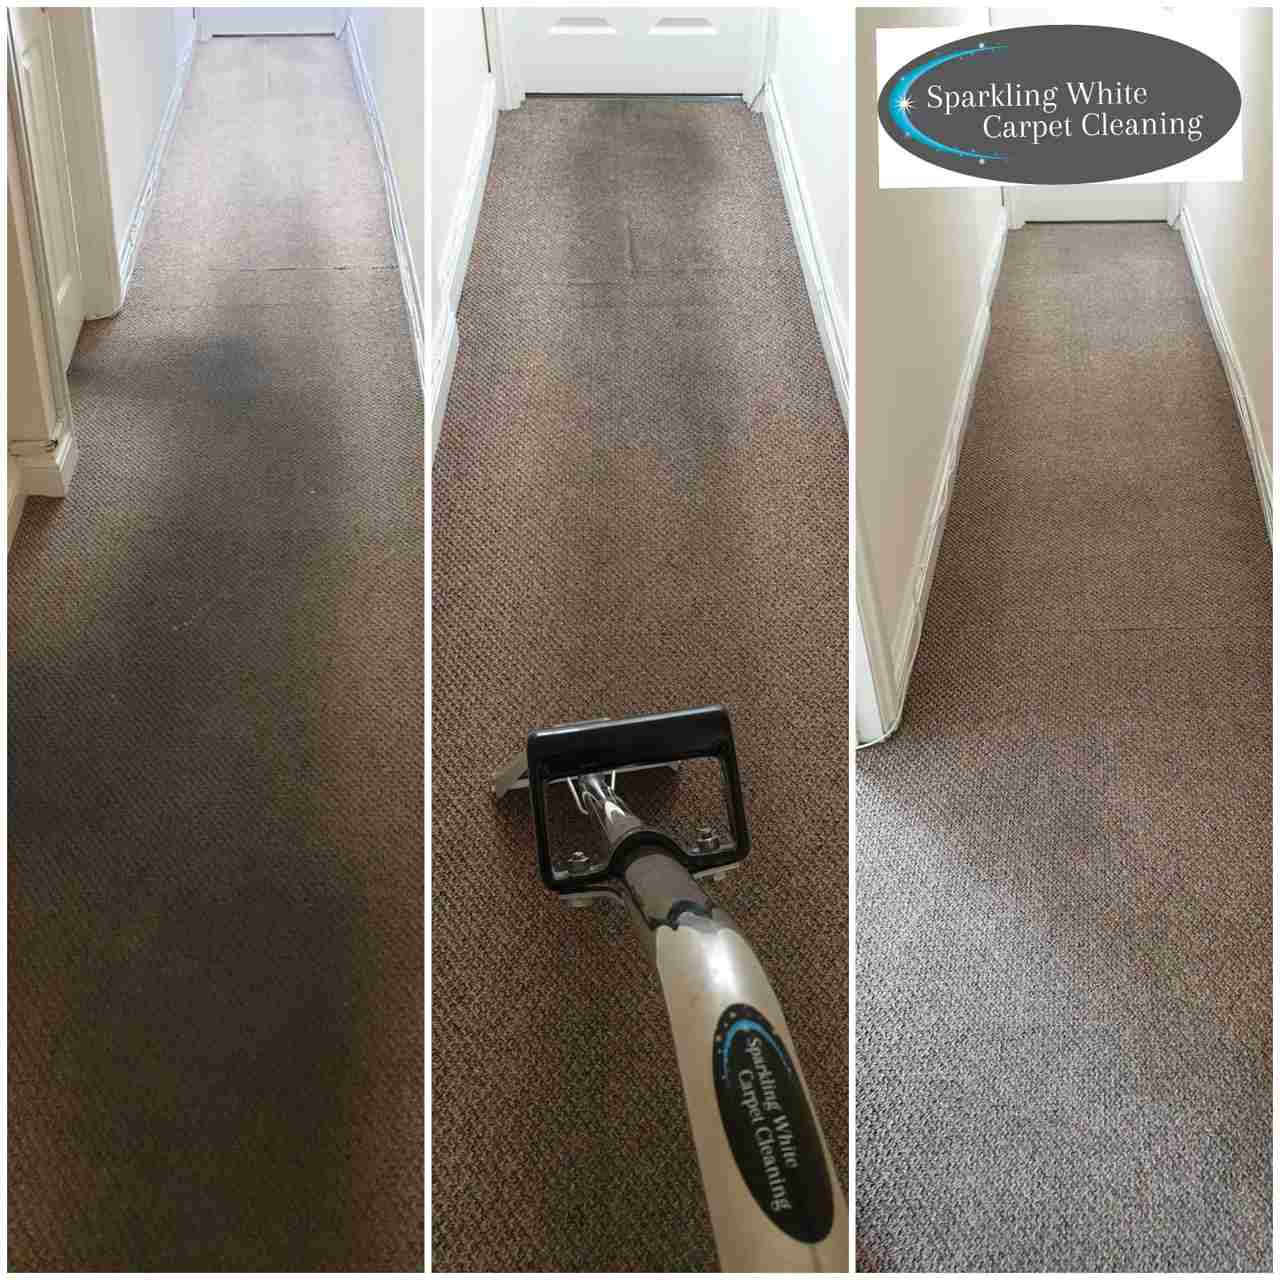 carpet, before, during and after cleaning